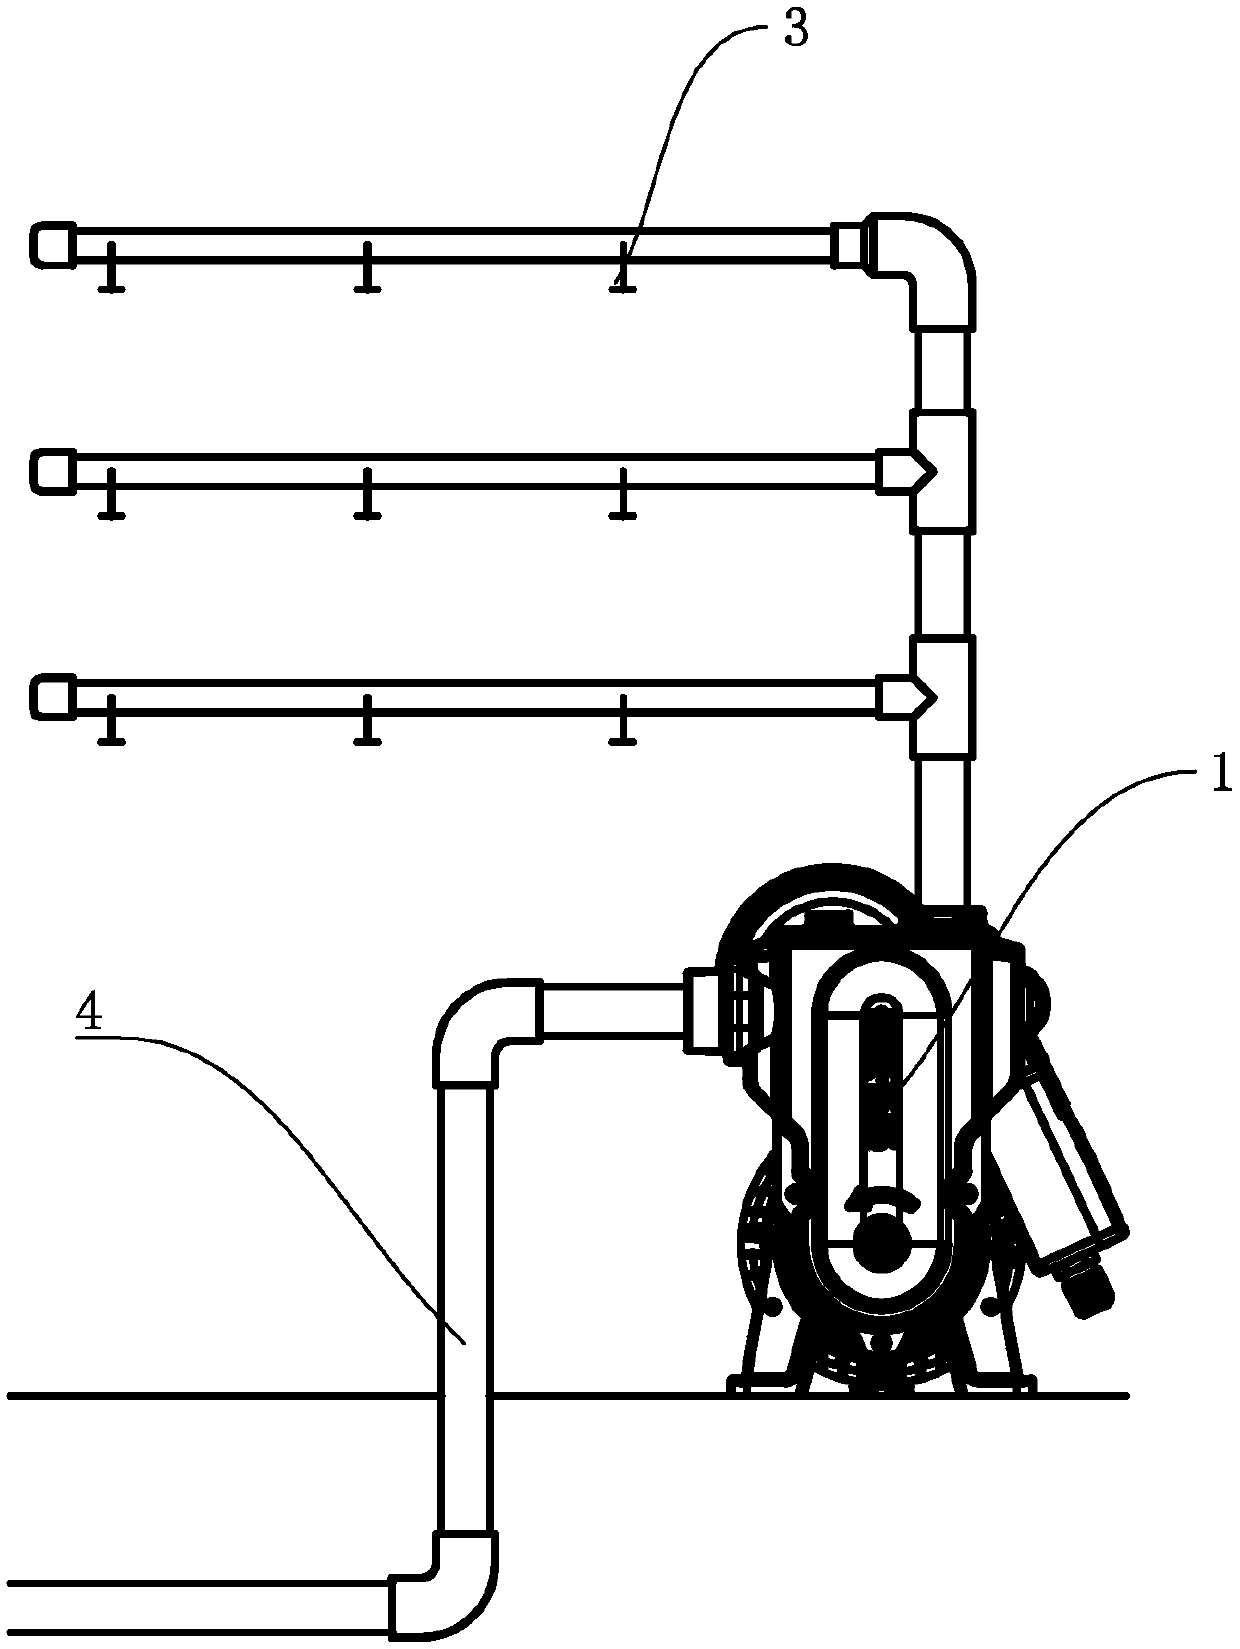 A water pump water supply control method